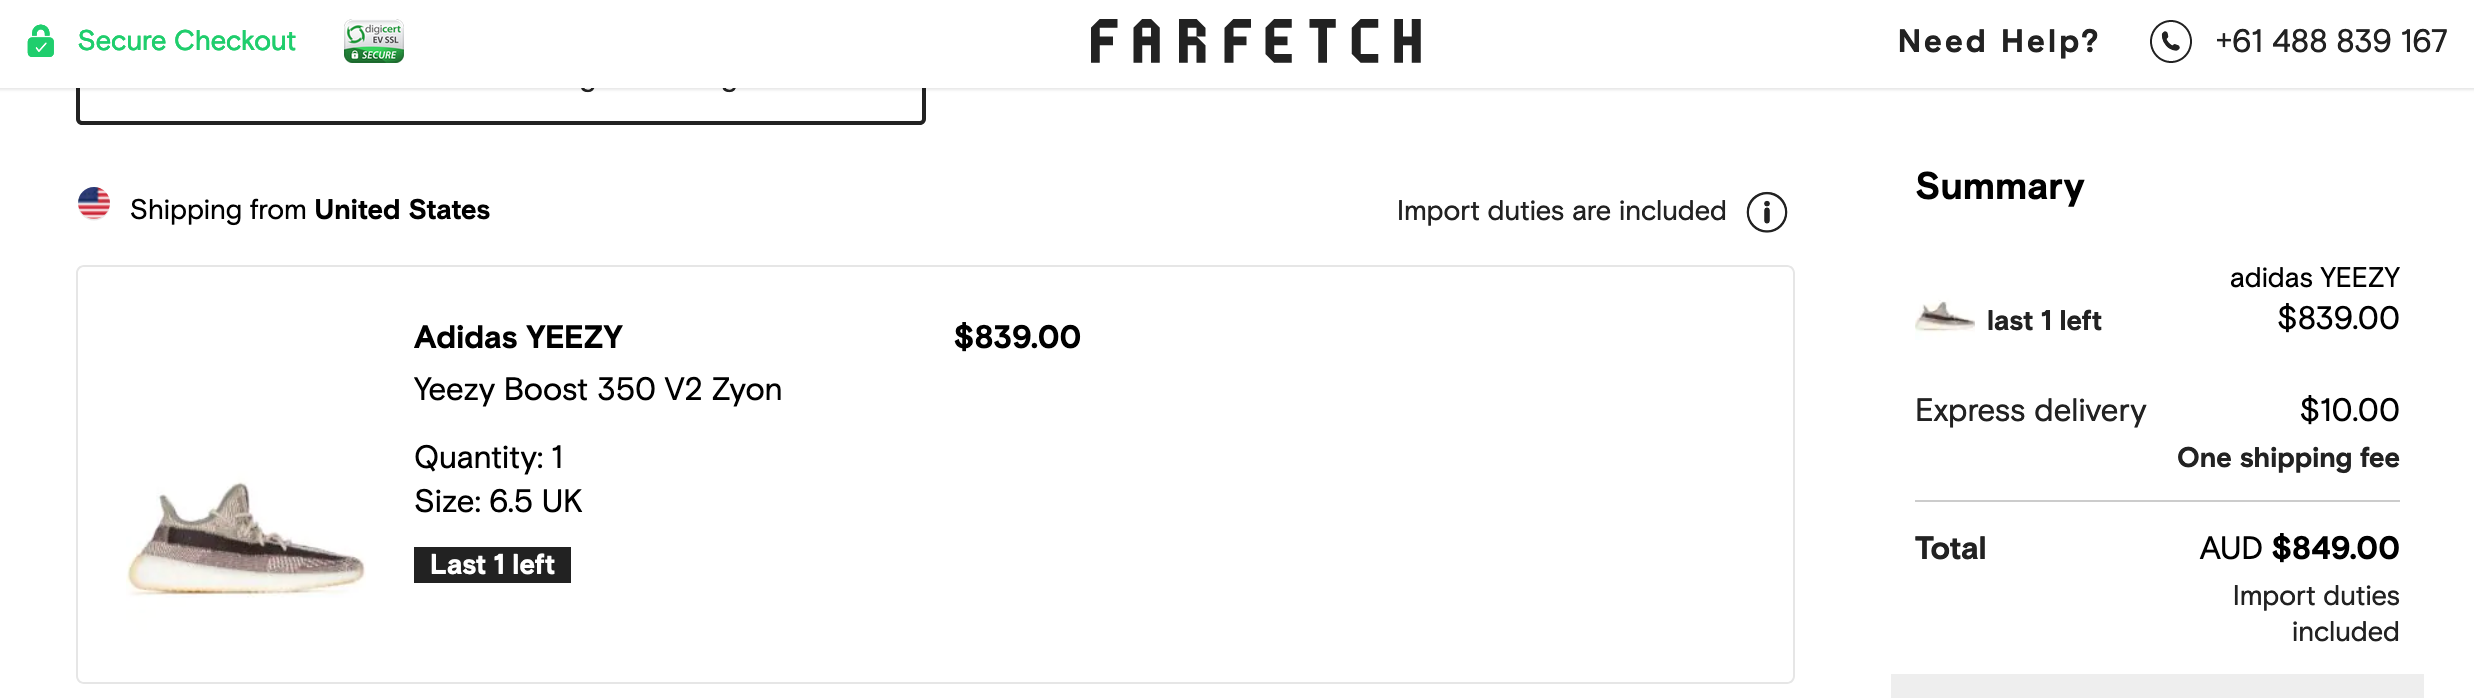 yeezy shipping cost